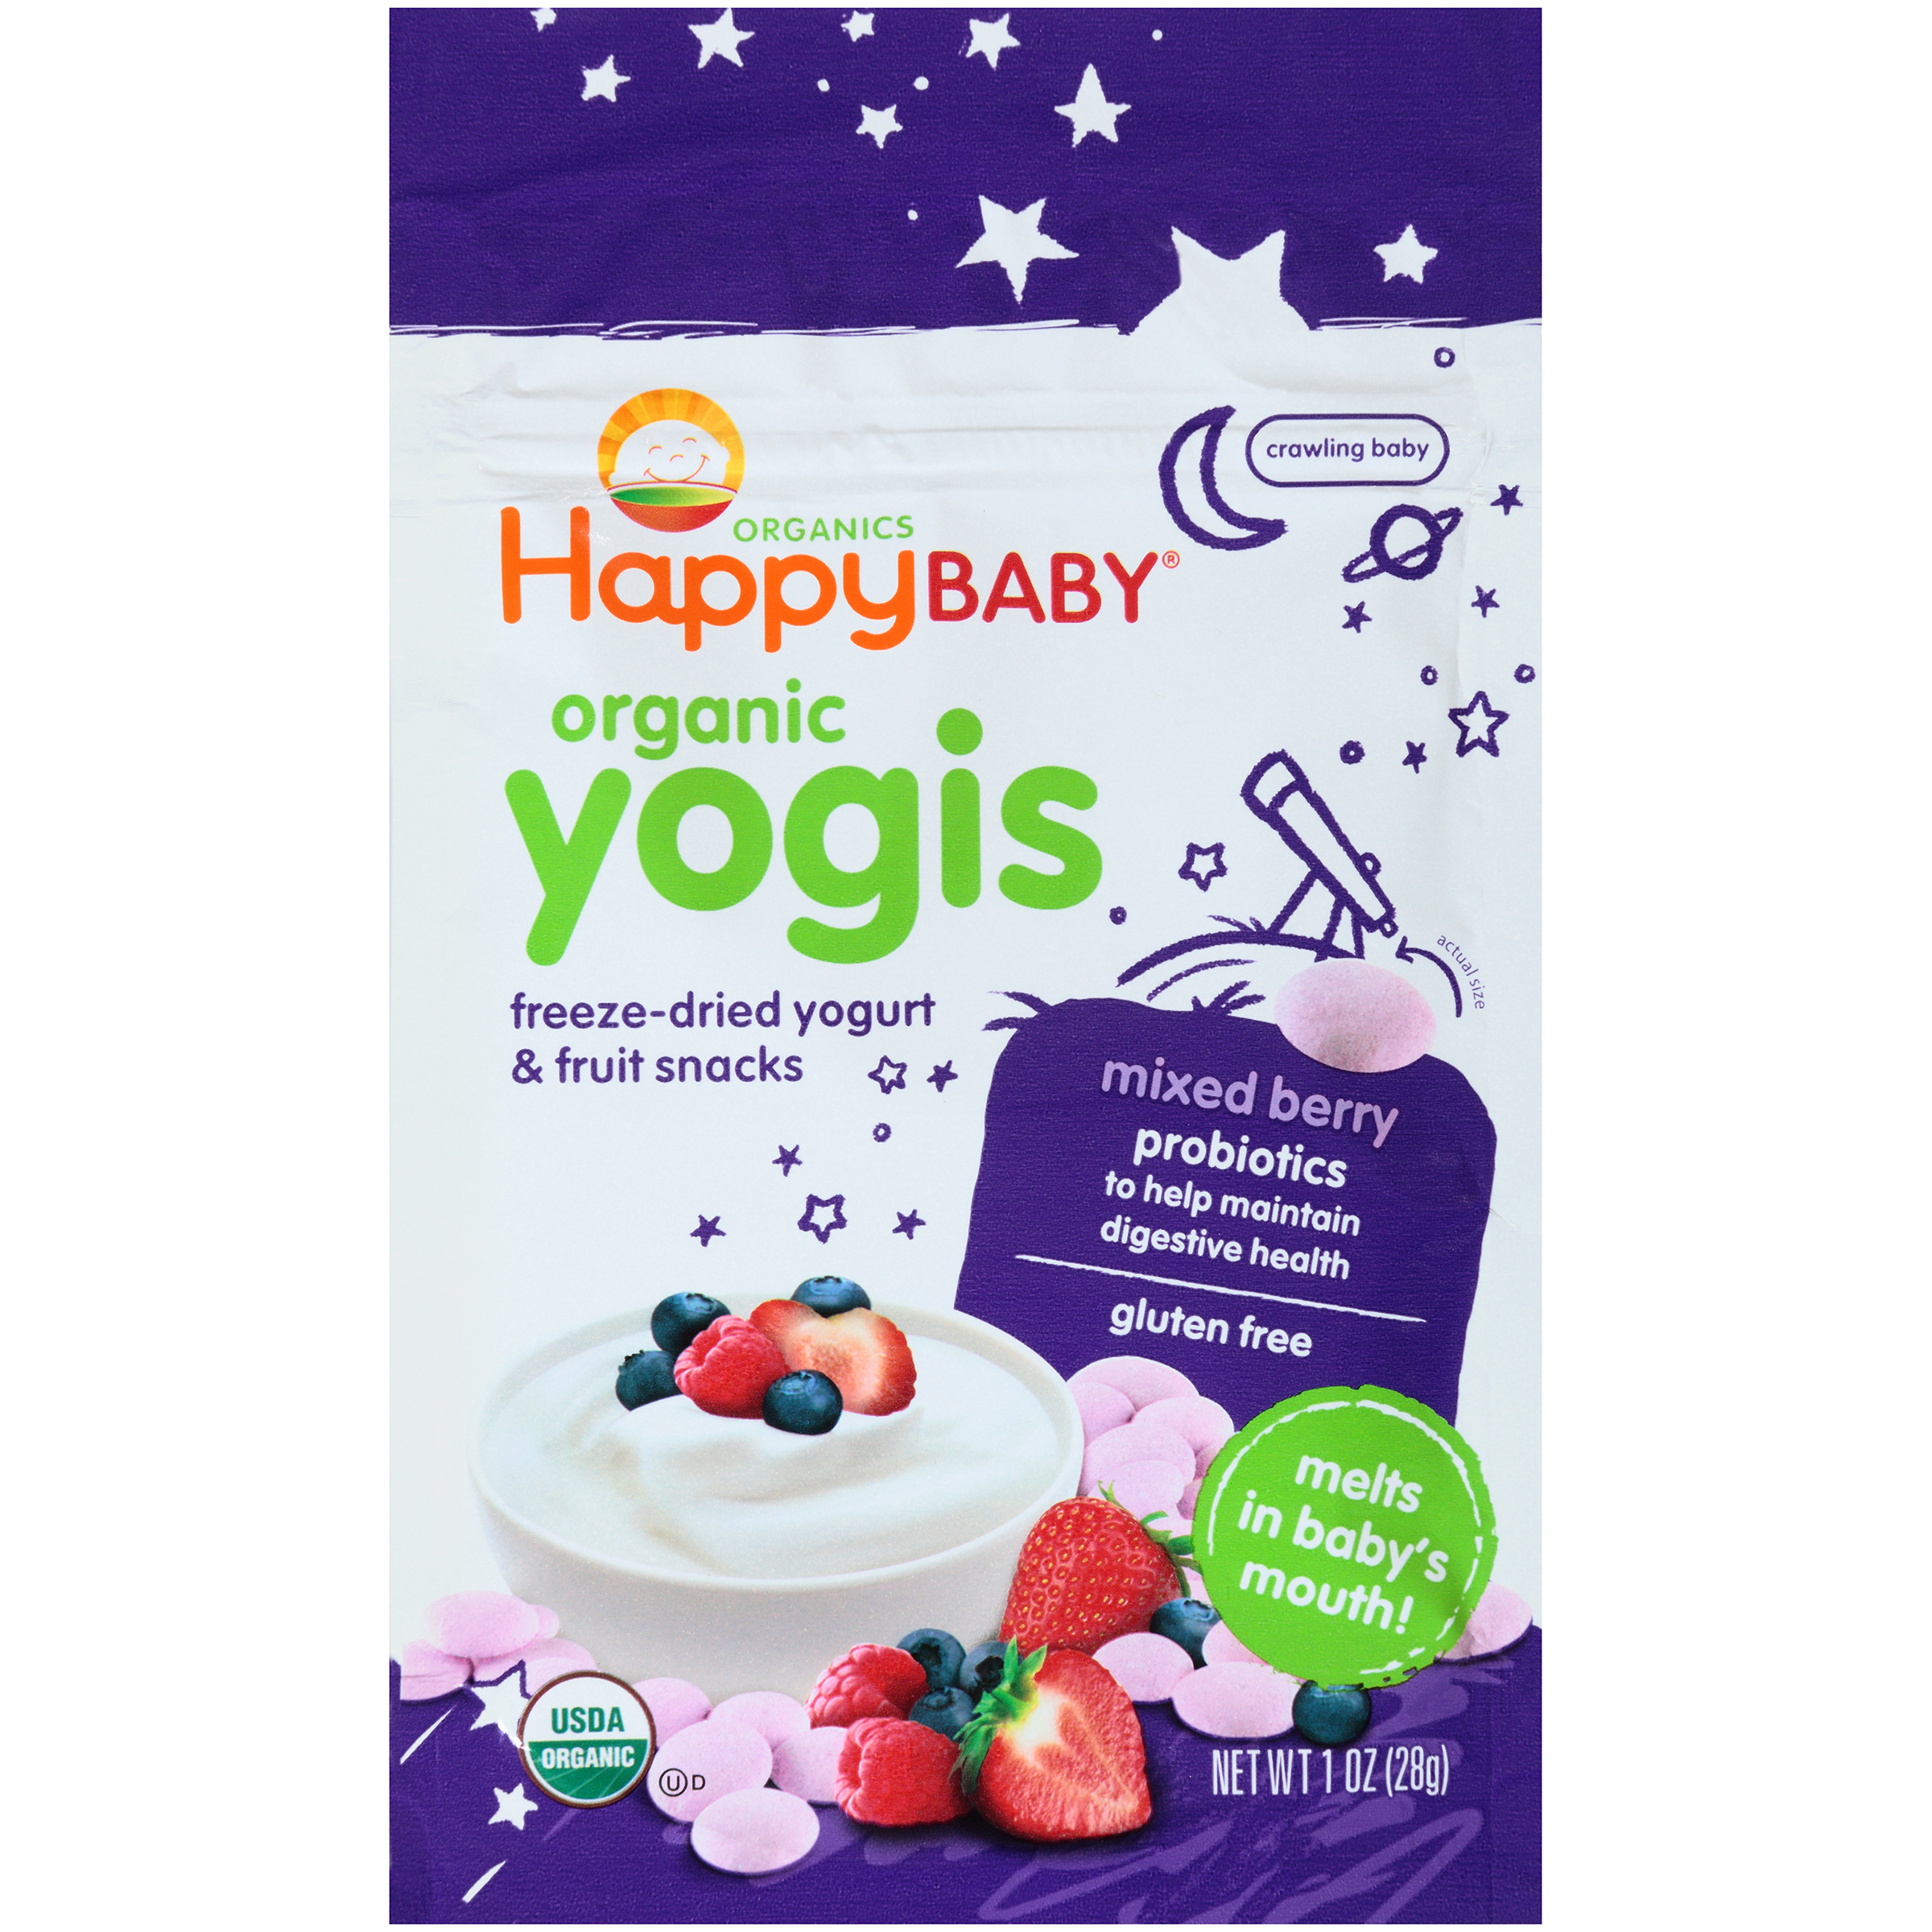 Yogis Organic Yogurt Snacks for Babies and Toddlers, Mixed Berry, 1oz.